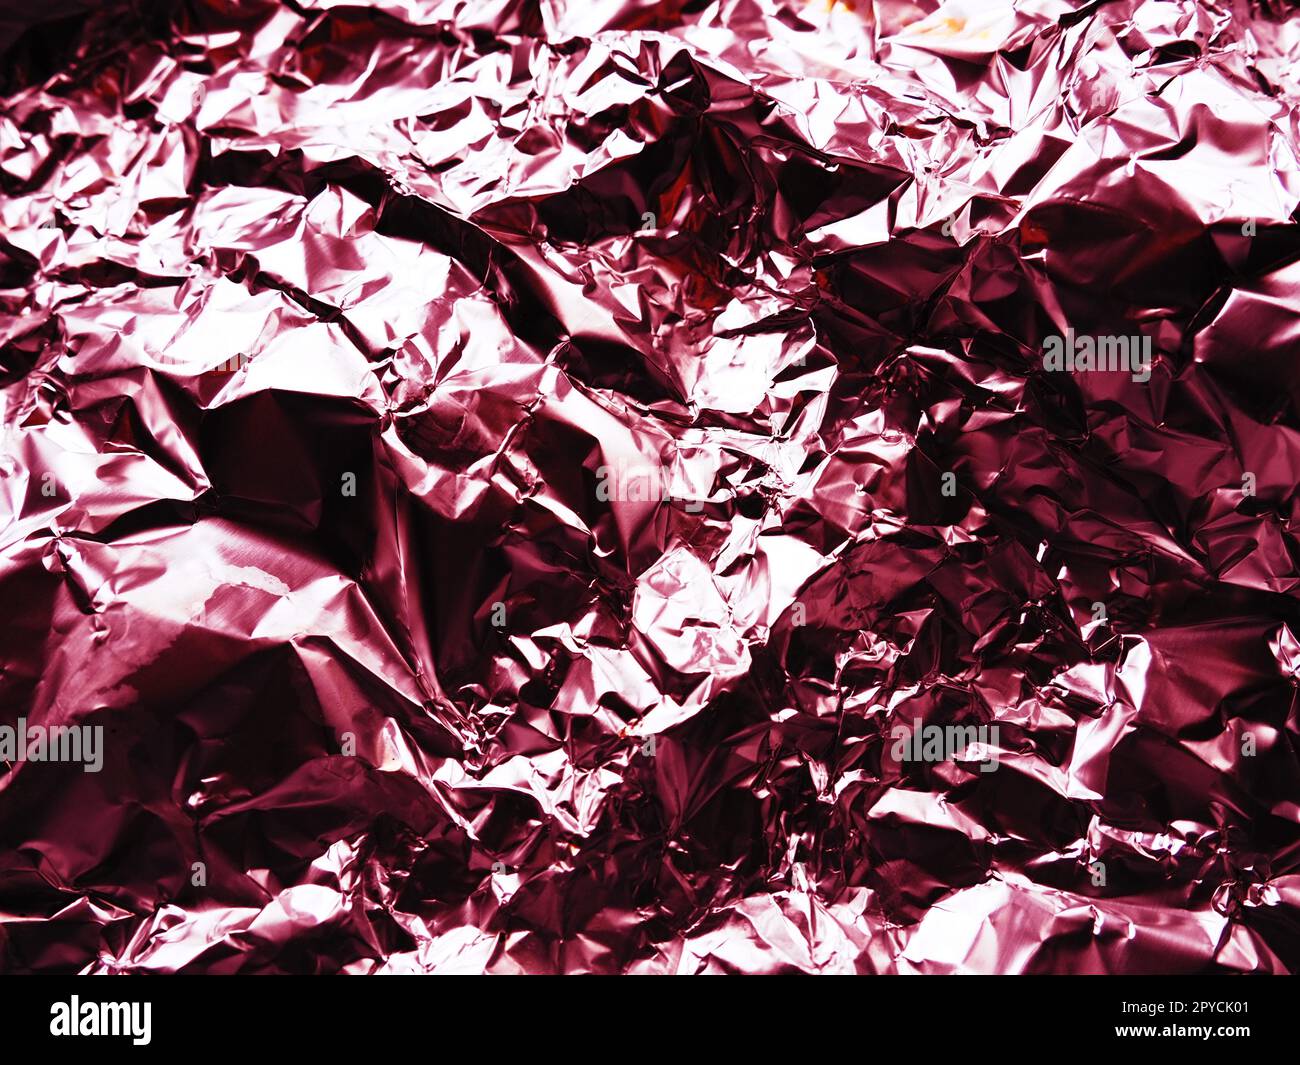 foil close-up. Aluminum silver crumpled foil. Abstract metallic background. Foil for baking food. Background with a red or burgundy tint Stock Photo